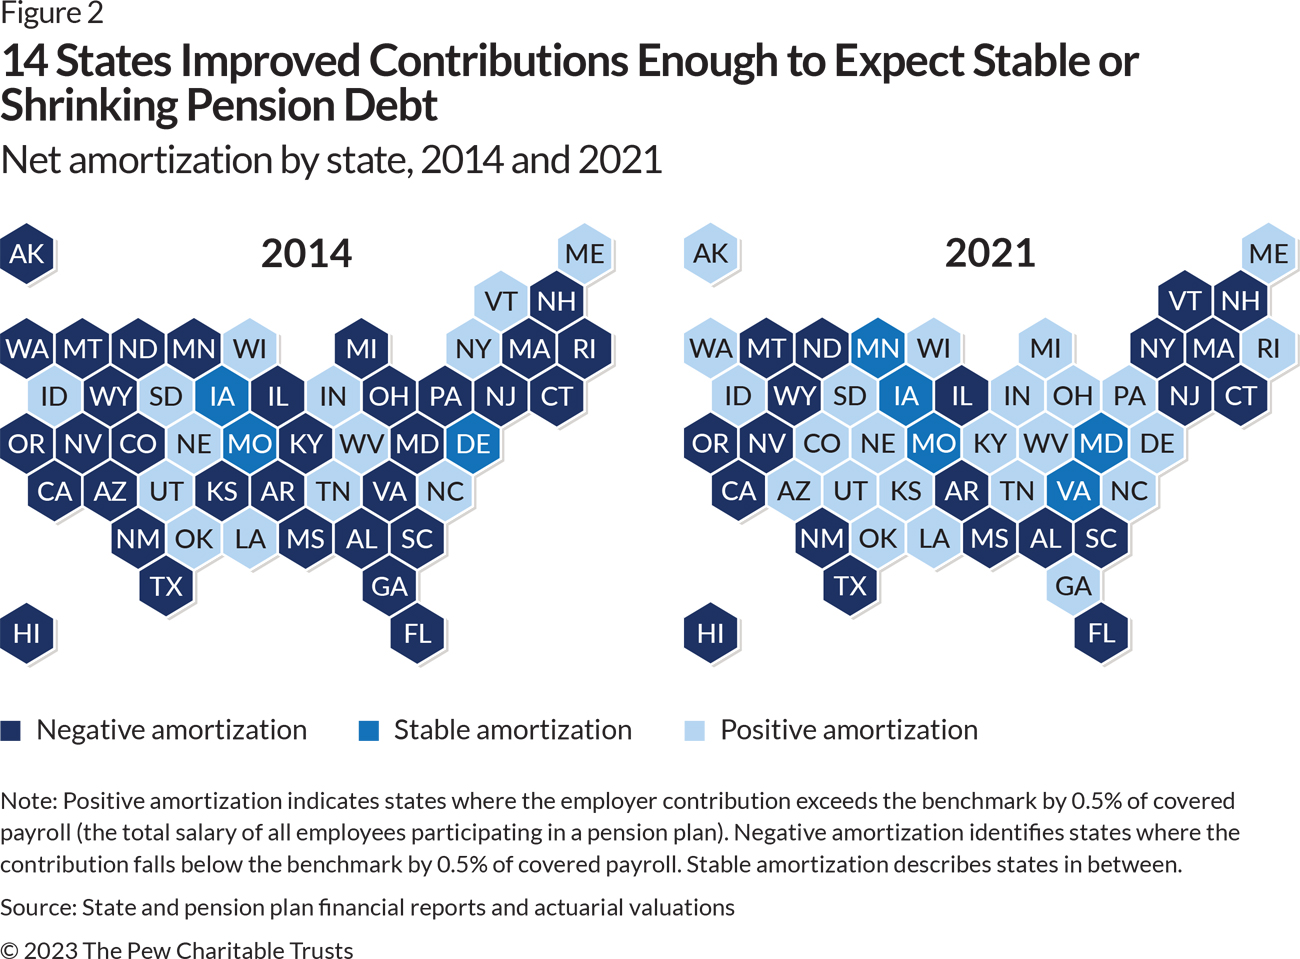 Two side-by-side maps of the United States compare the number of states with positive amortization in light blue, stable amortization in bright blue, and negative amortization in dark blue in 2014 and 2021, showing that of the 33 states that had negative amortization in 2014, 12 had achieved positive or stable amortization seven years later.